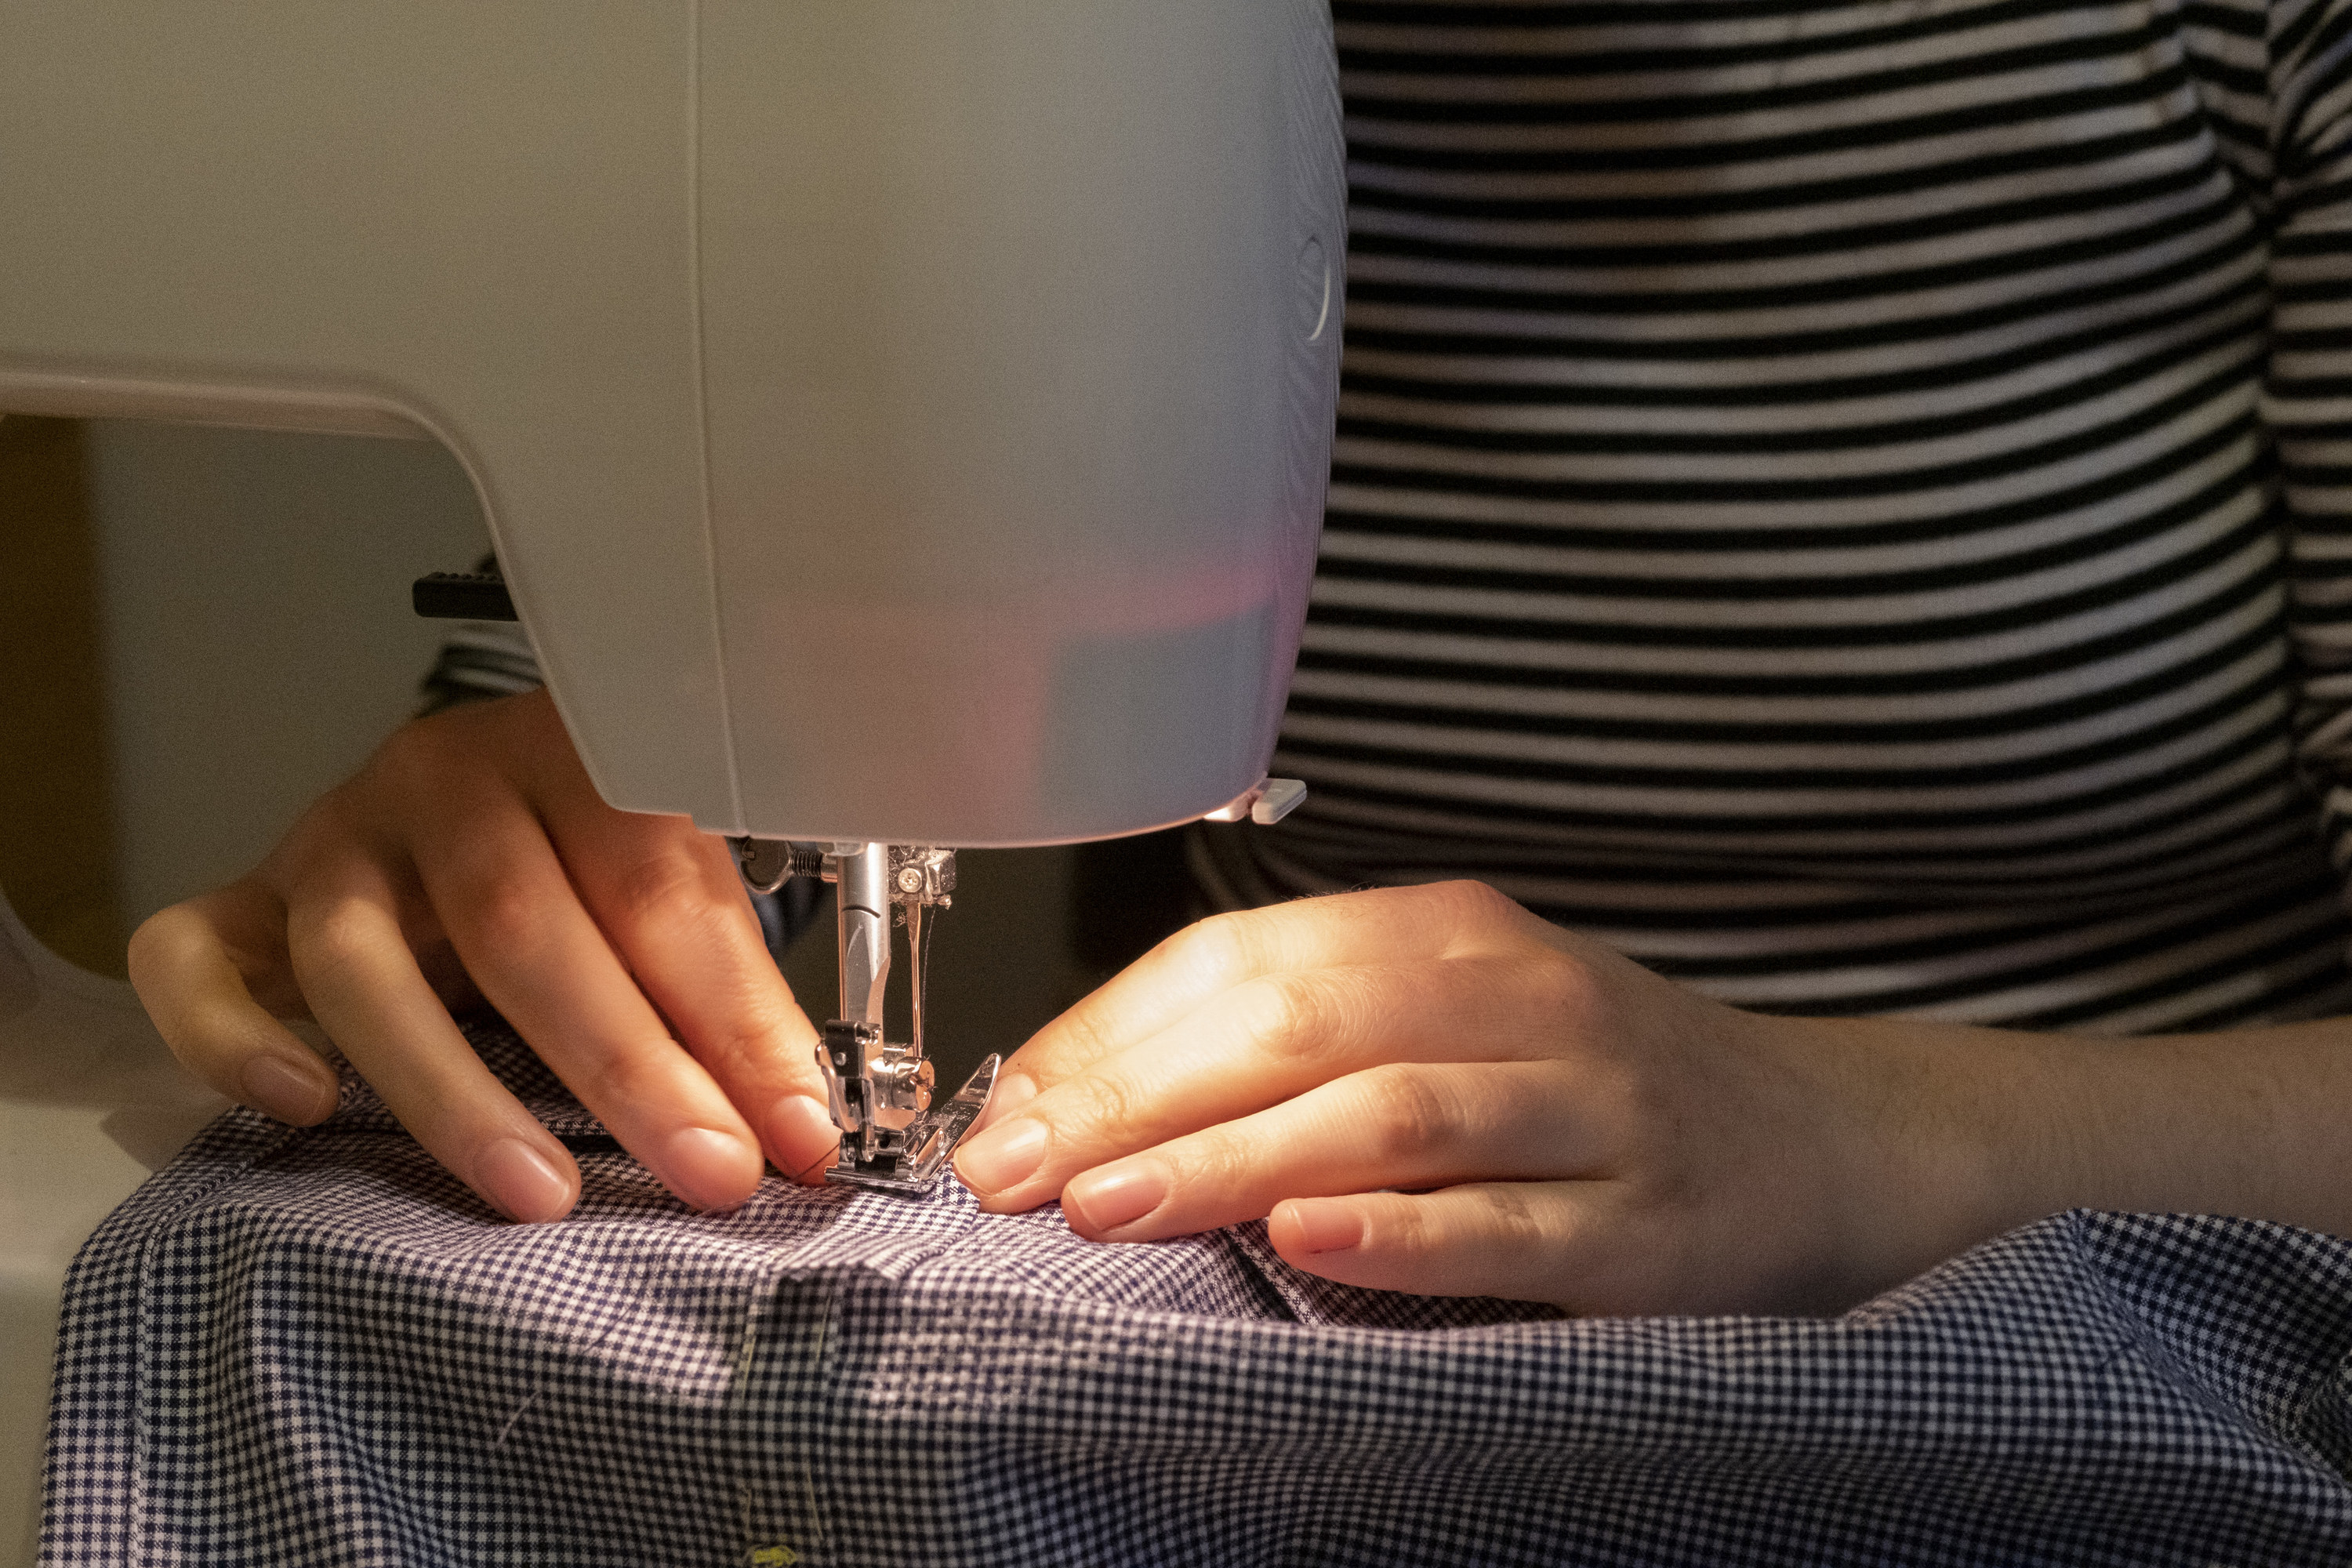 A woman sews a dress at home in March 2021